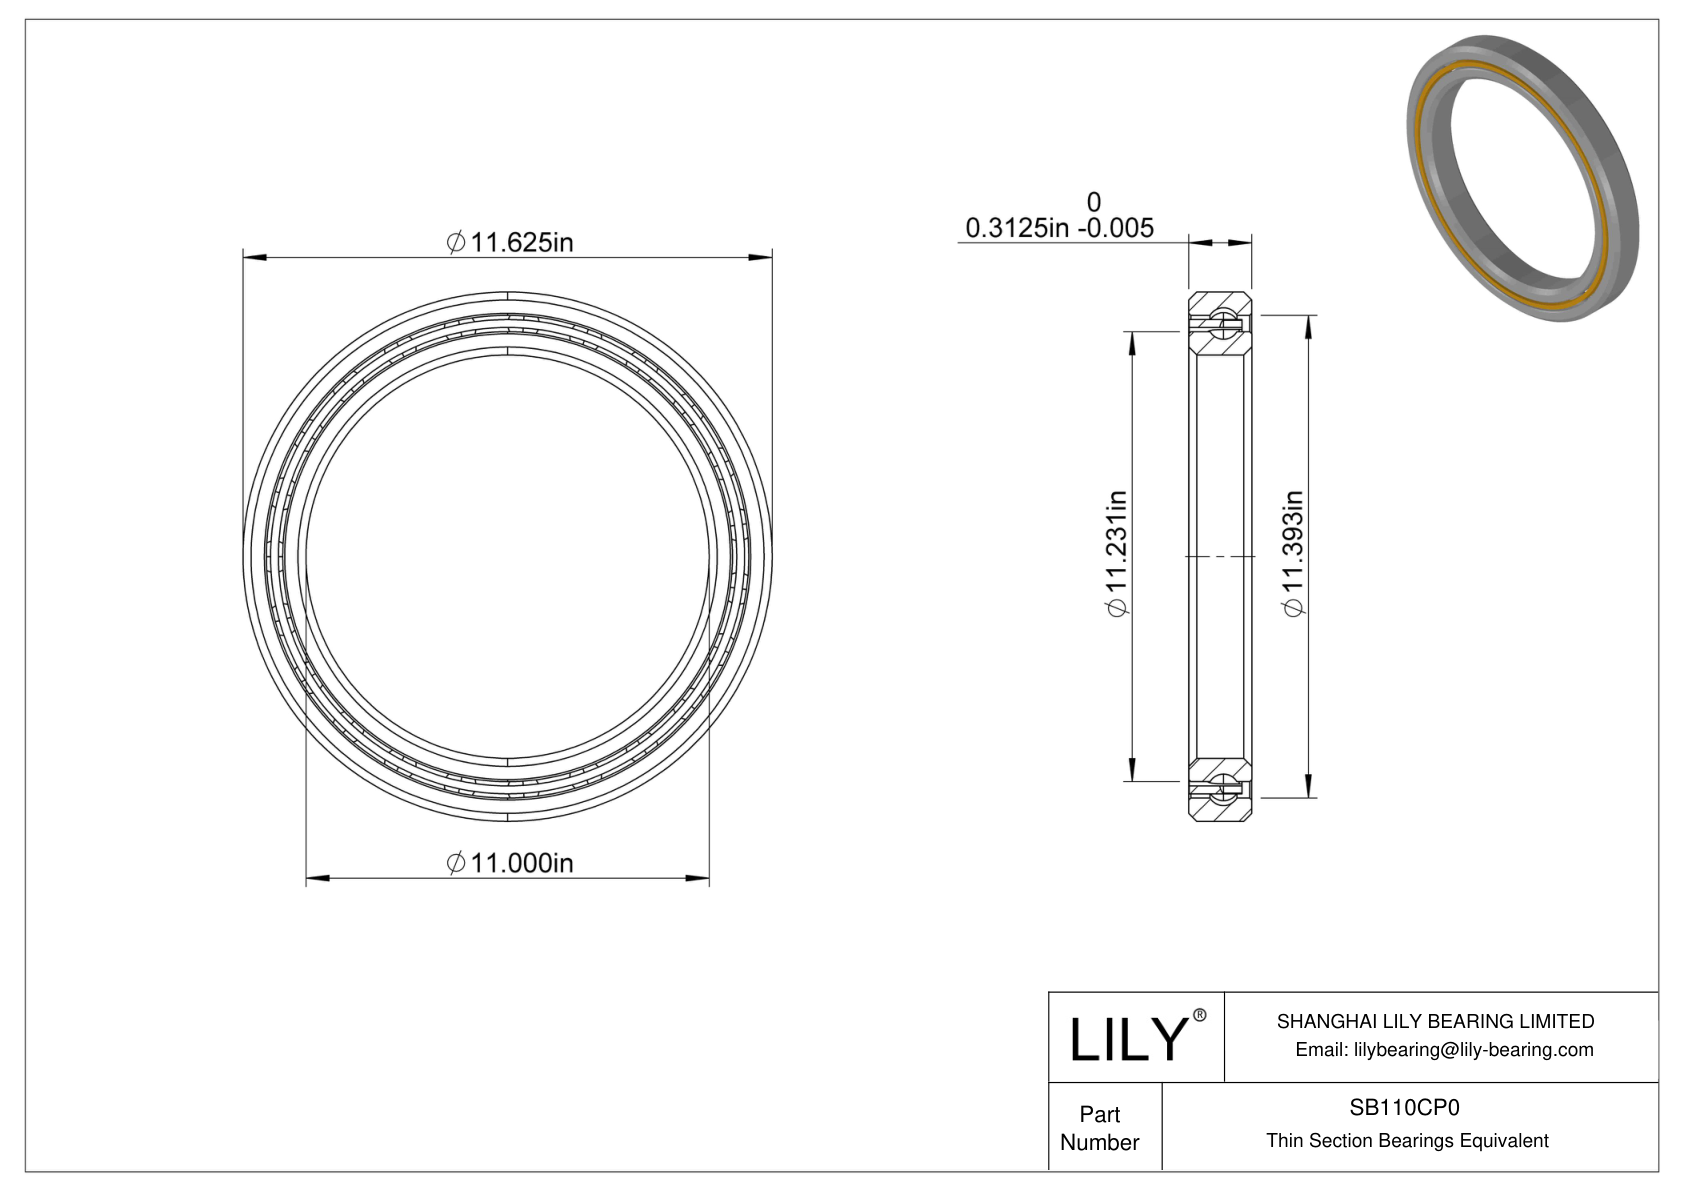 SB110CP0 Constant Section (CS) Bearings cad drawing